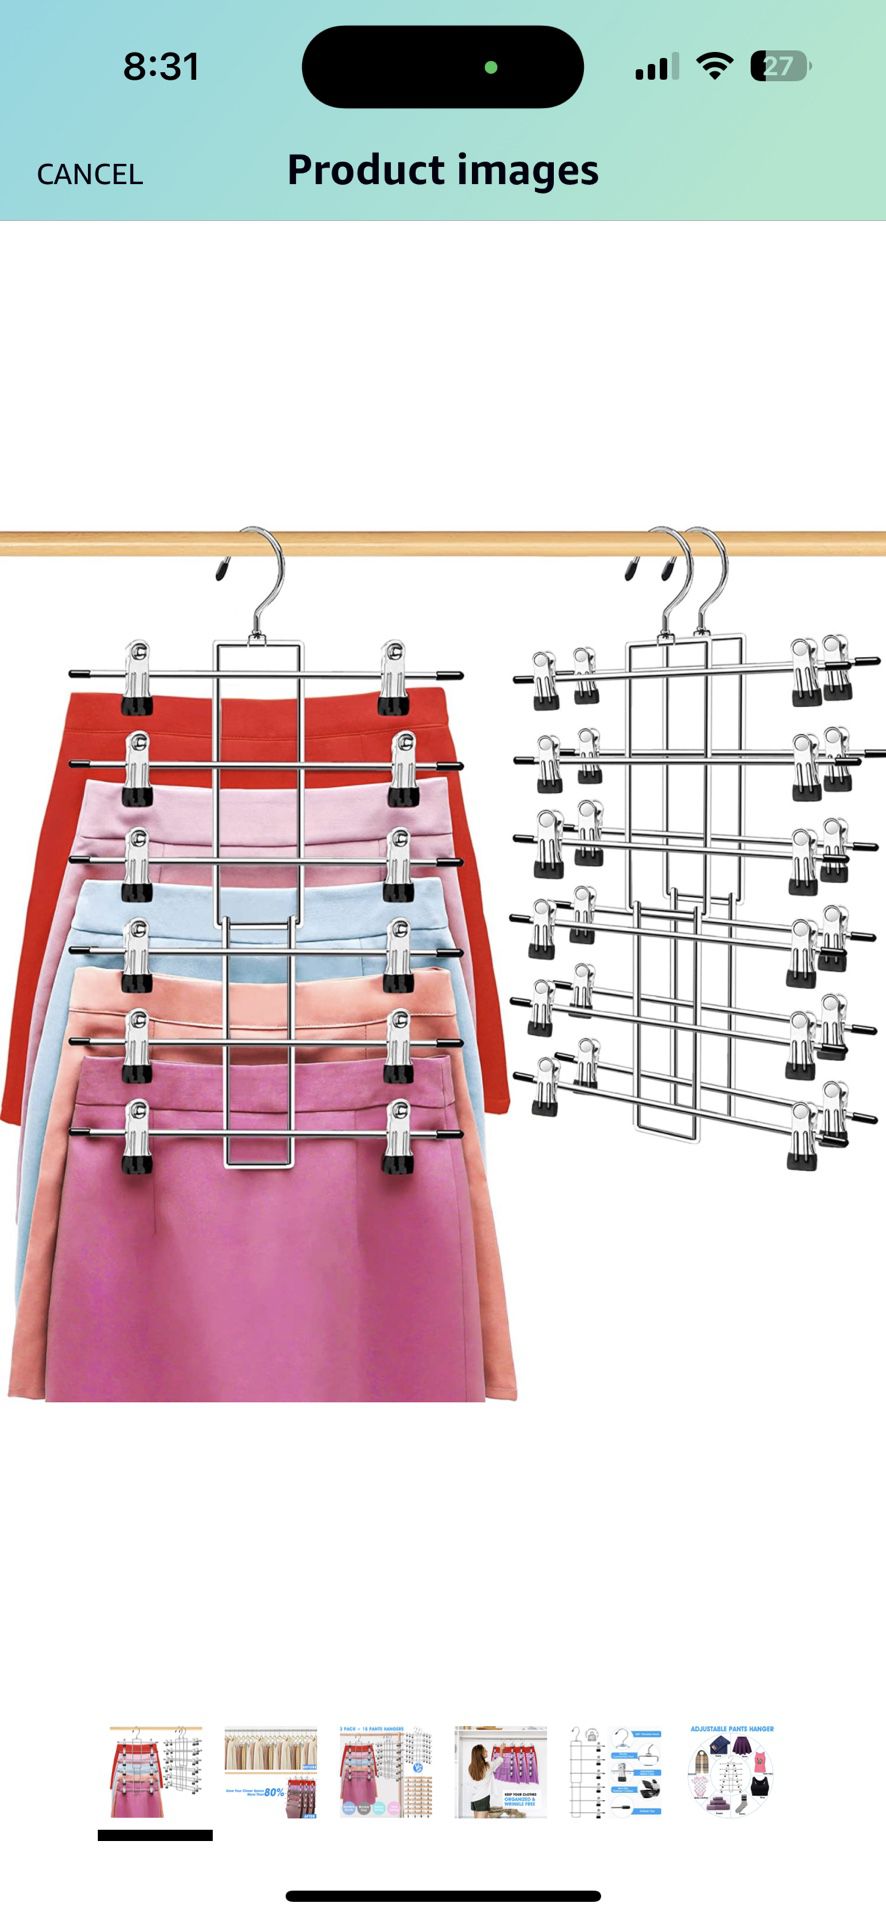 Organization and Storage Skirt Pants Hangers Space Saving,3 Pack 6 Tier Closet Organizers and Storage,Closet Storage Home Organization College Dorm Ro